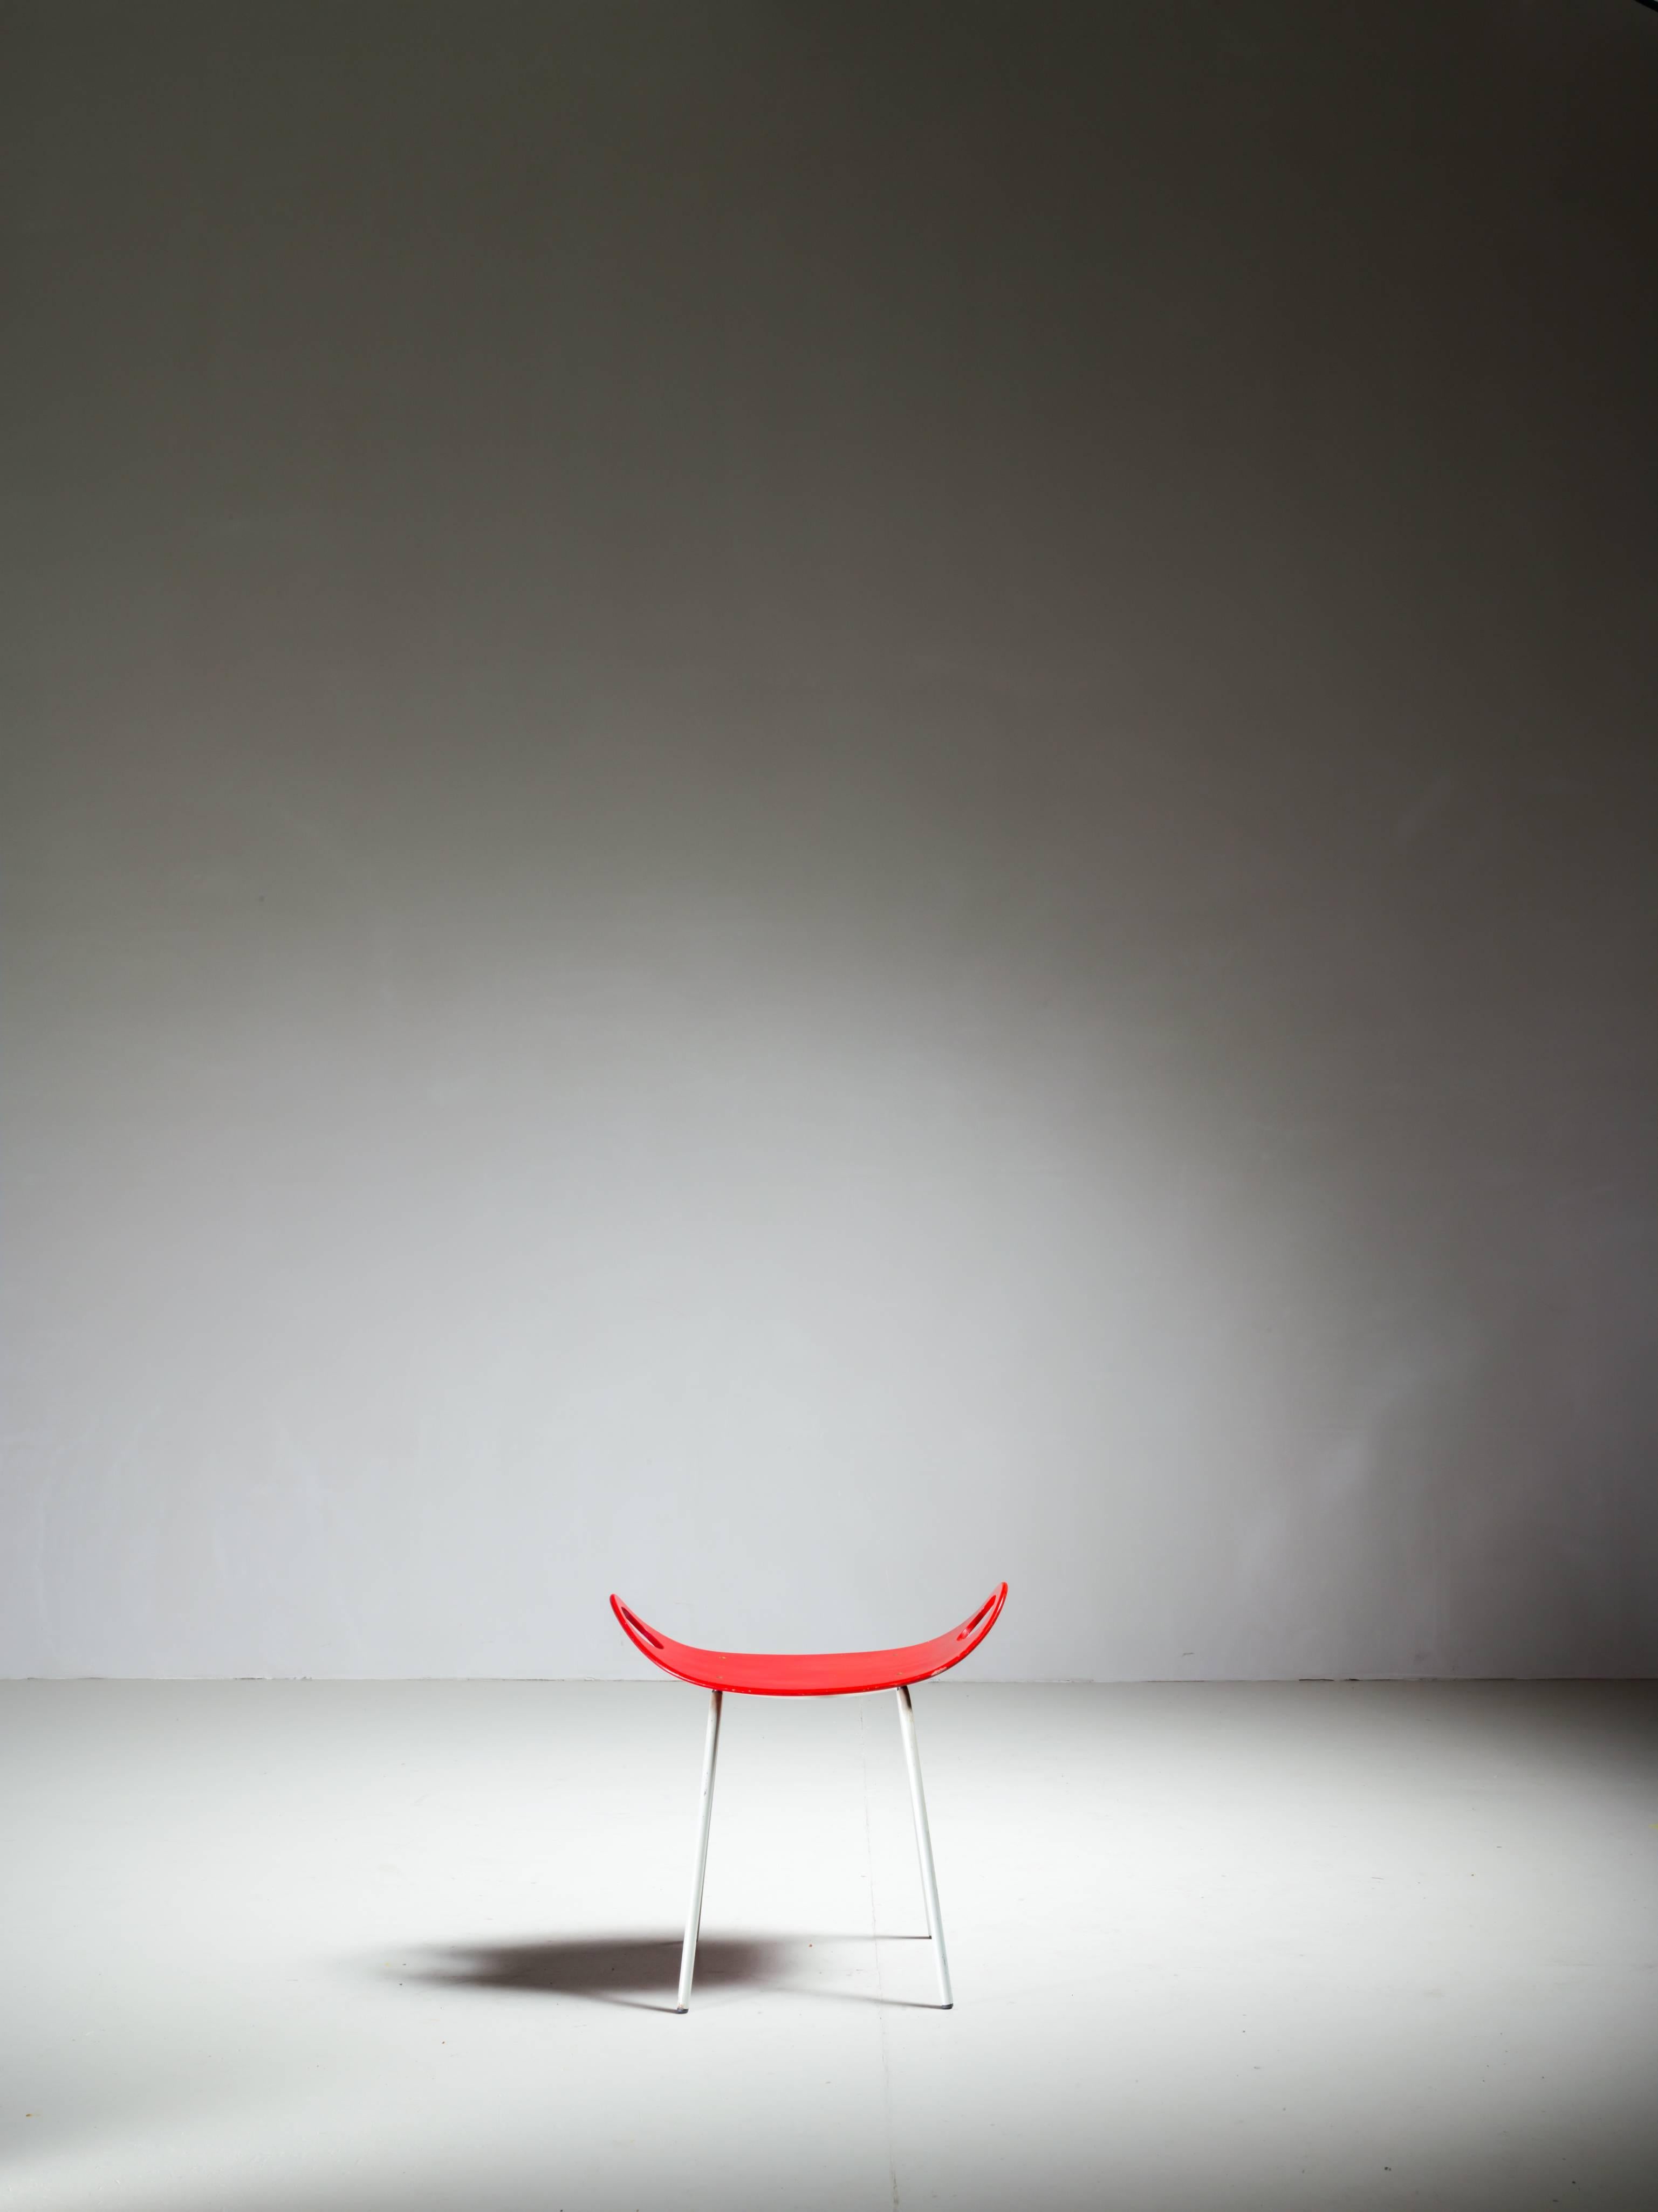 A 1950s stool by Olof Kettunen for Merivaara, Finland.
The stool is made of white tubular metal legs and a red lacquered plywood seat which curves upwards.
A simple and elegant design in a lovely condition.
